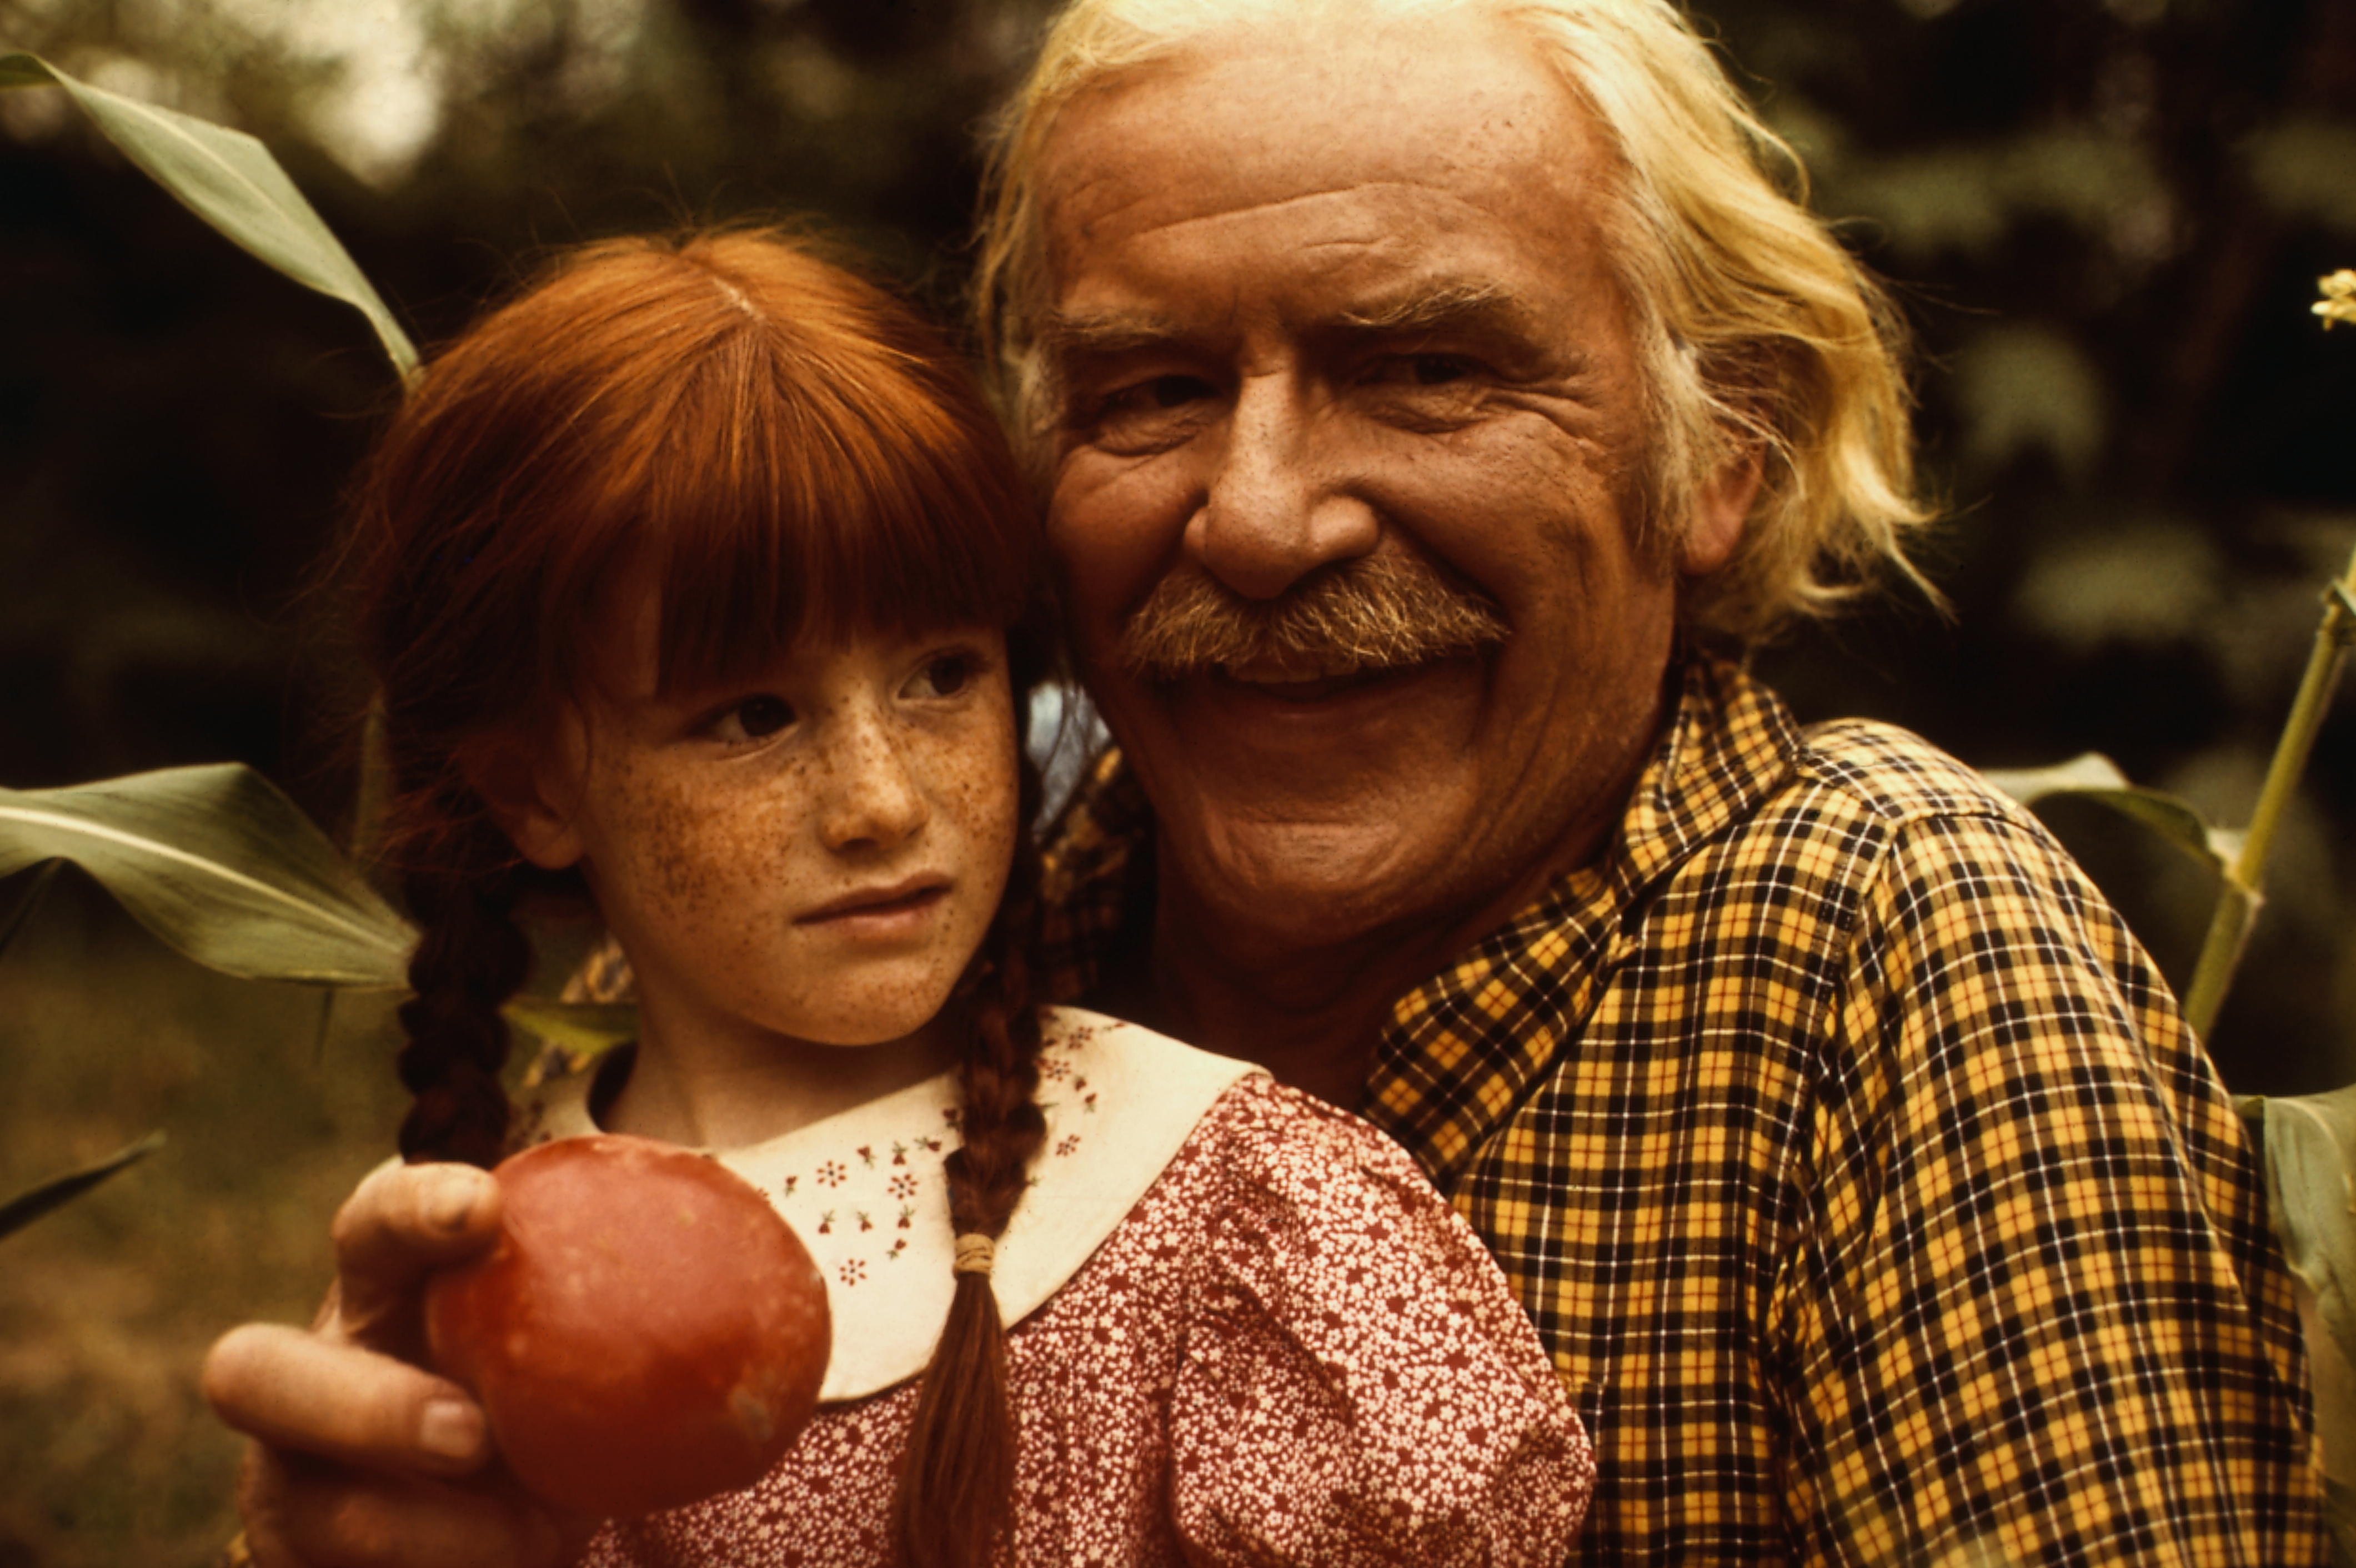 Kami Cotler as Elizabeth Walton and Will Geer as Zebulon Tyler Walton on "The Waltons" in 1973. | Source: Getty Images